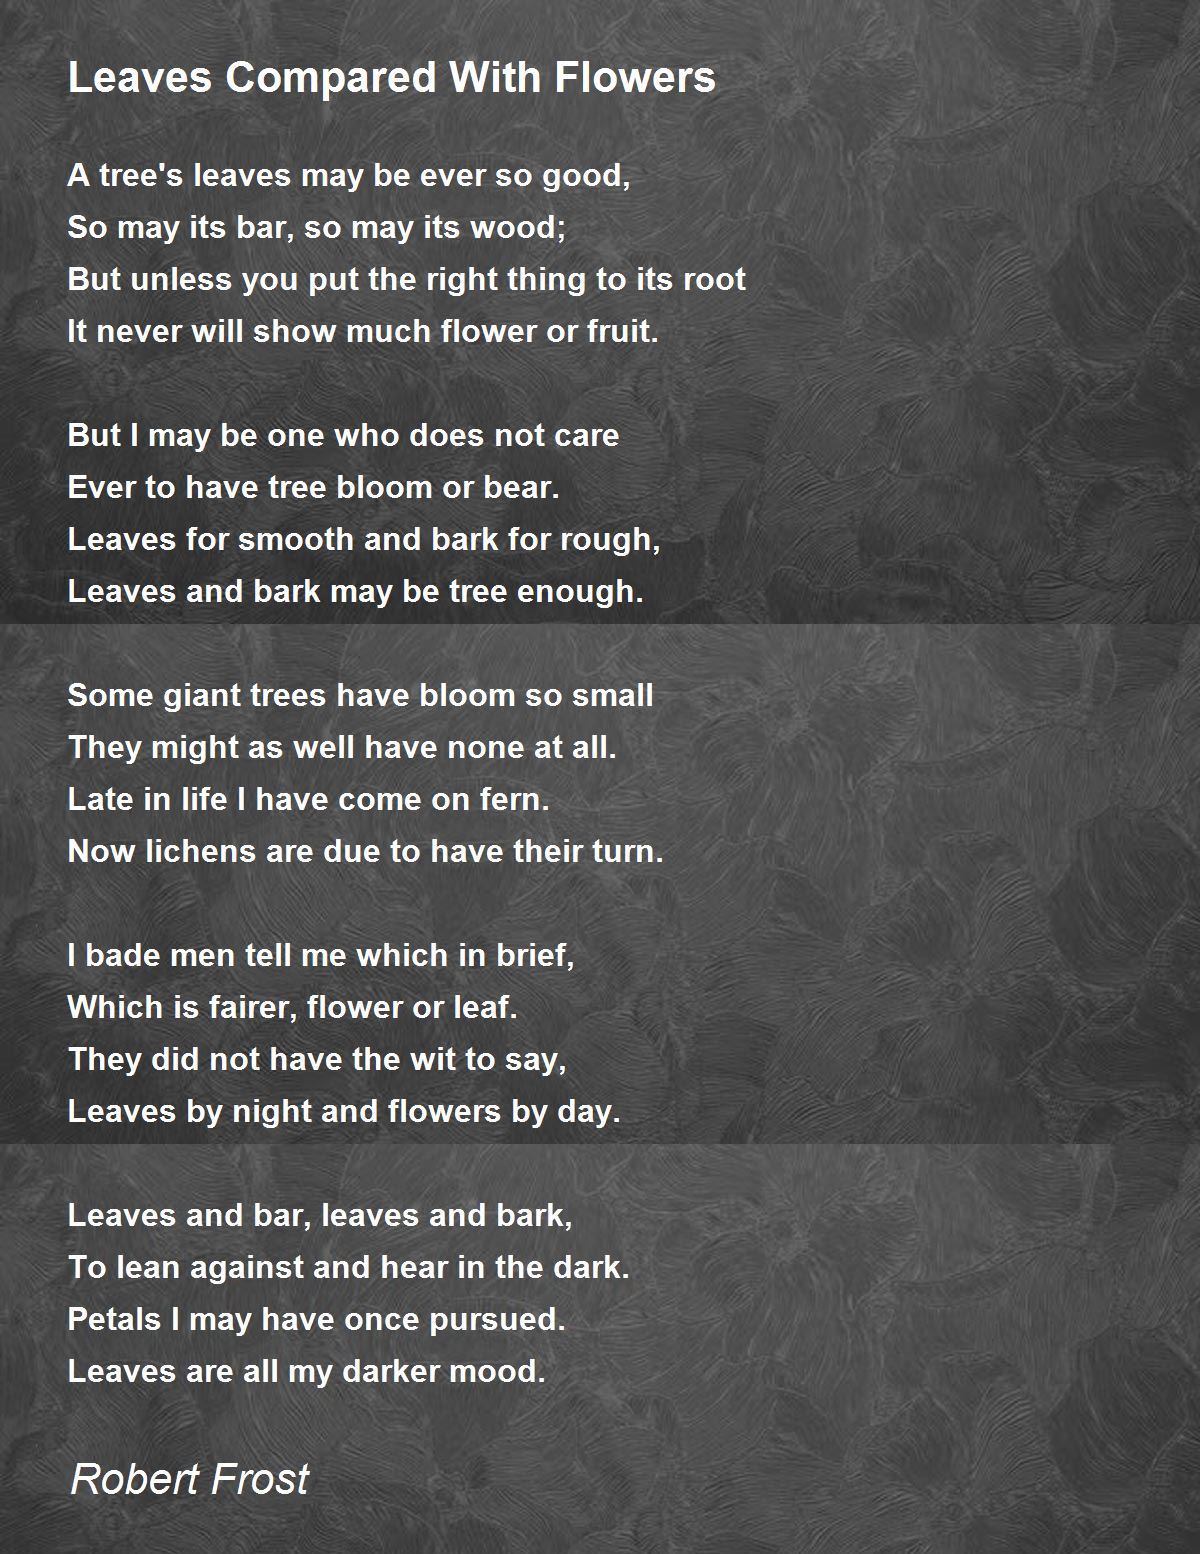 Leaves Compared With Flowers Poem by Robert Frost - Poem Hunter